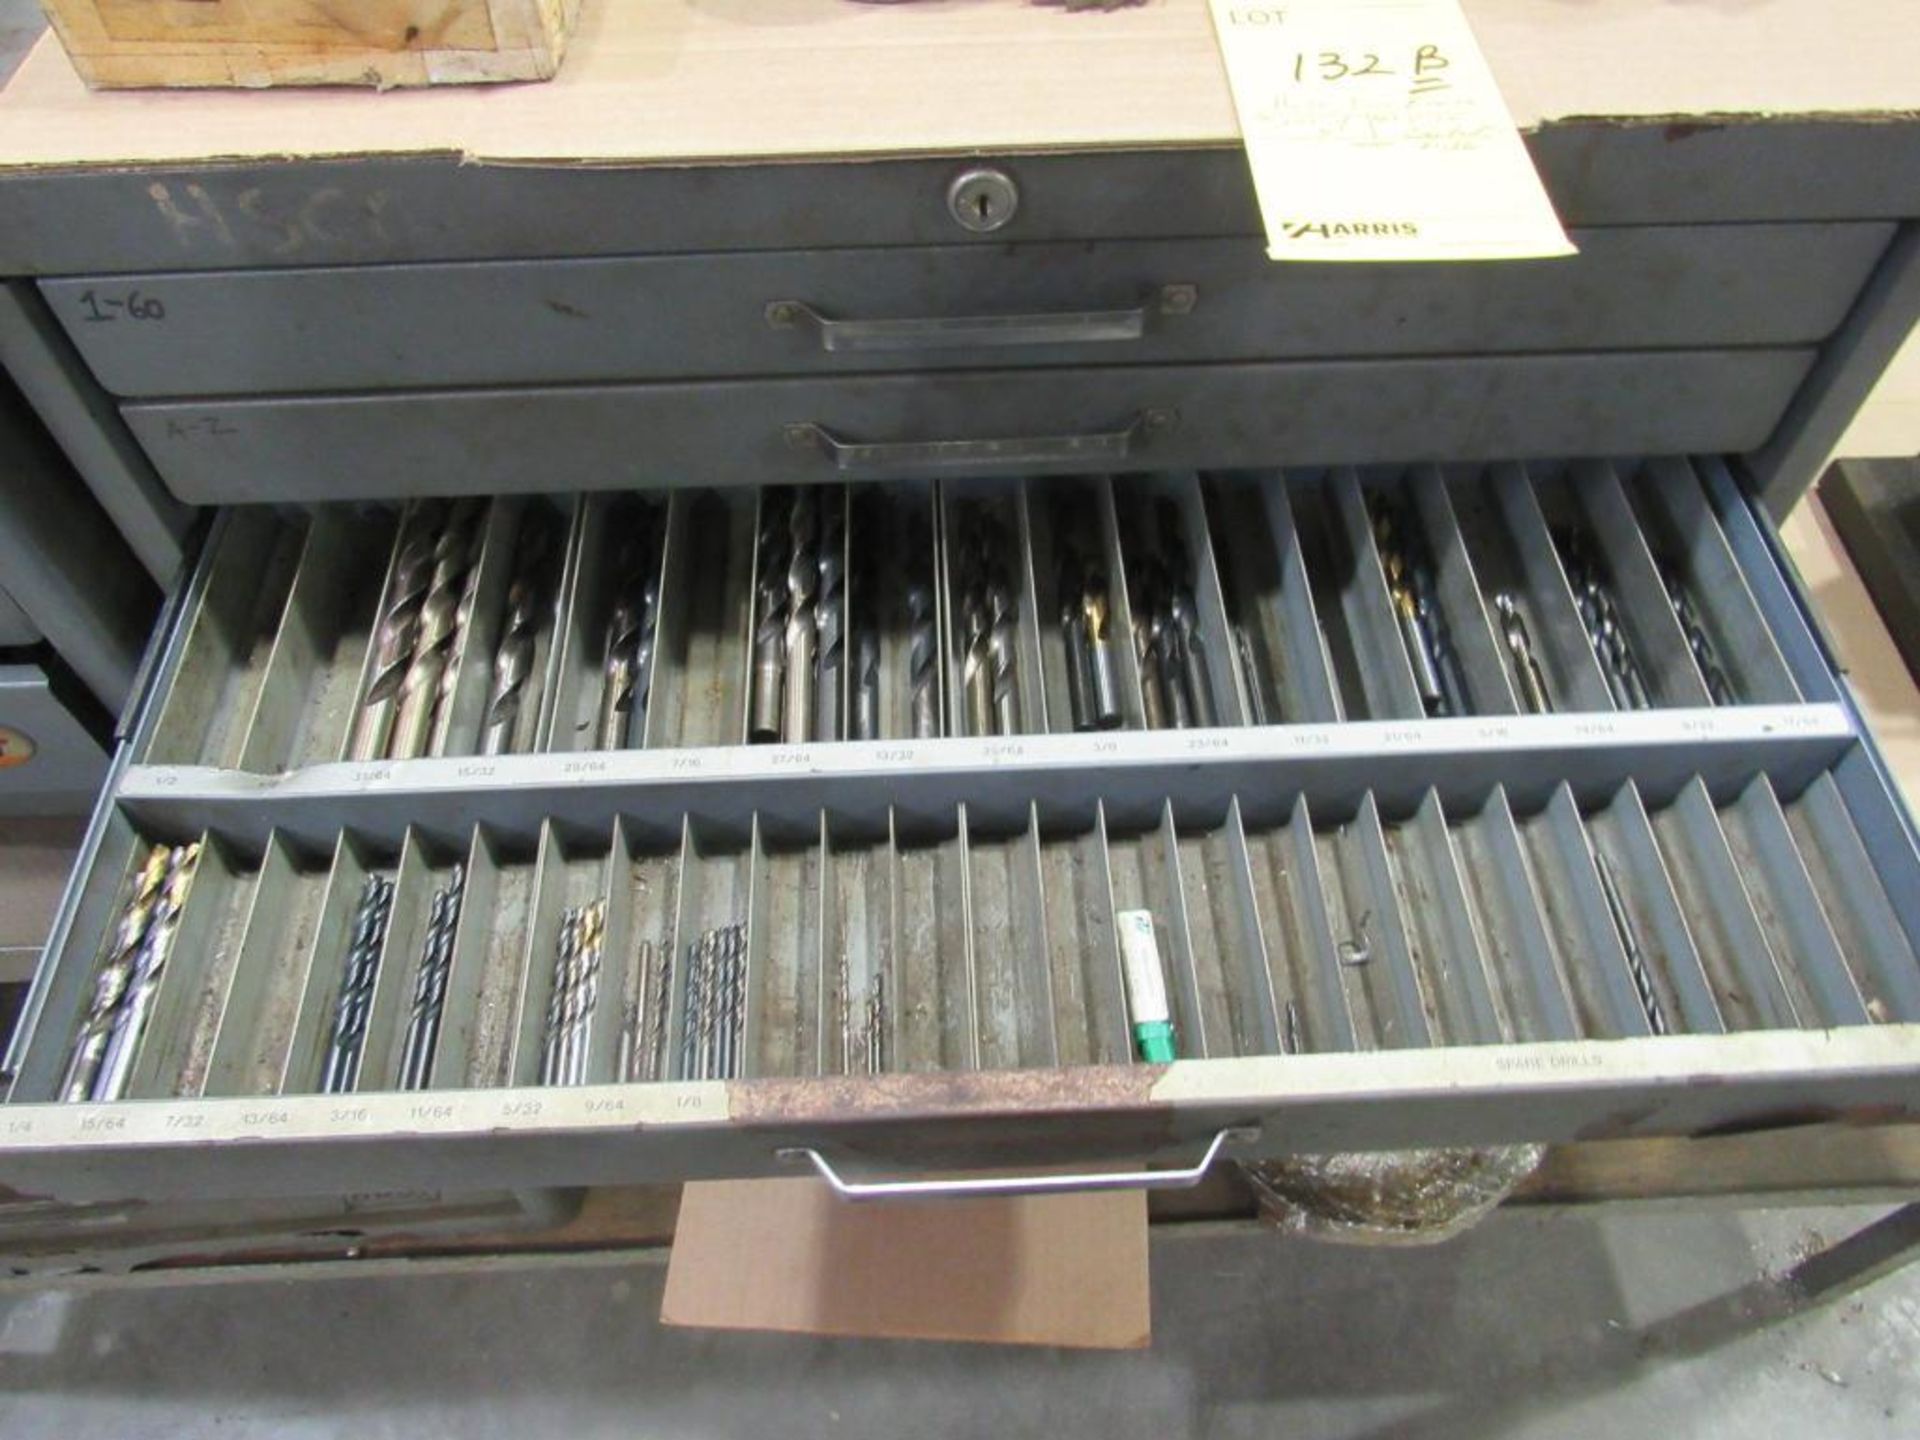 Lot of 3: Huot Tool Boxes with Assorted Size Drills, sockets, other, Operator Bench - Image 9 of 14